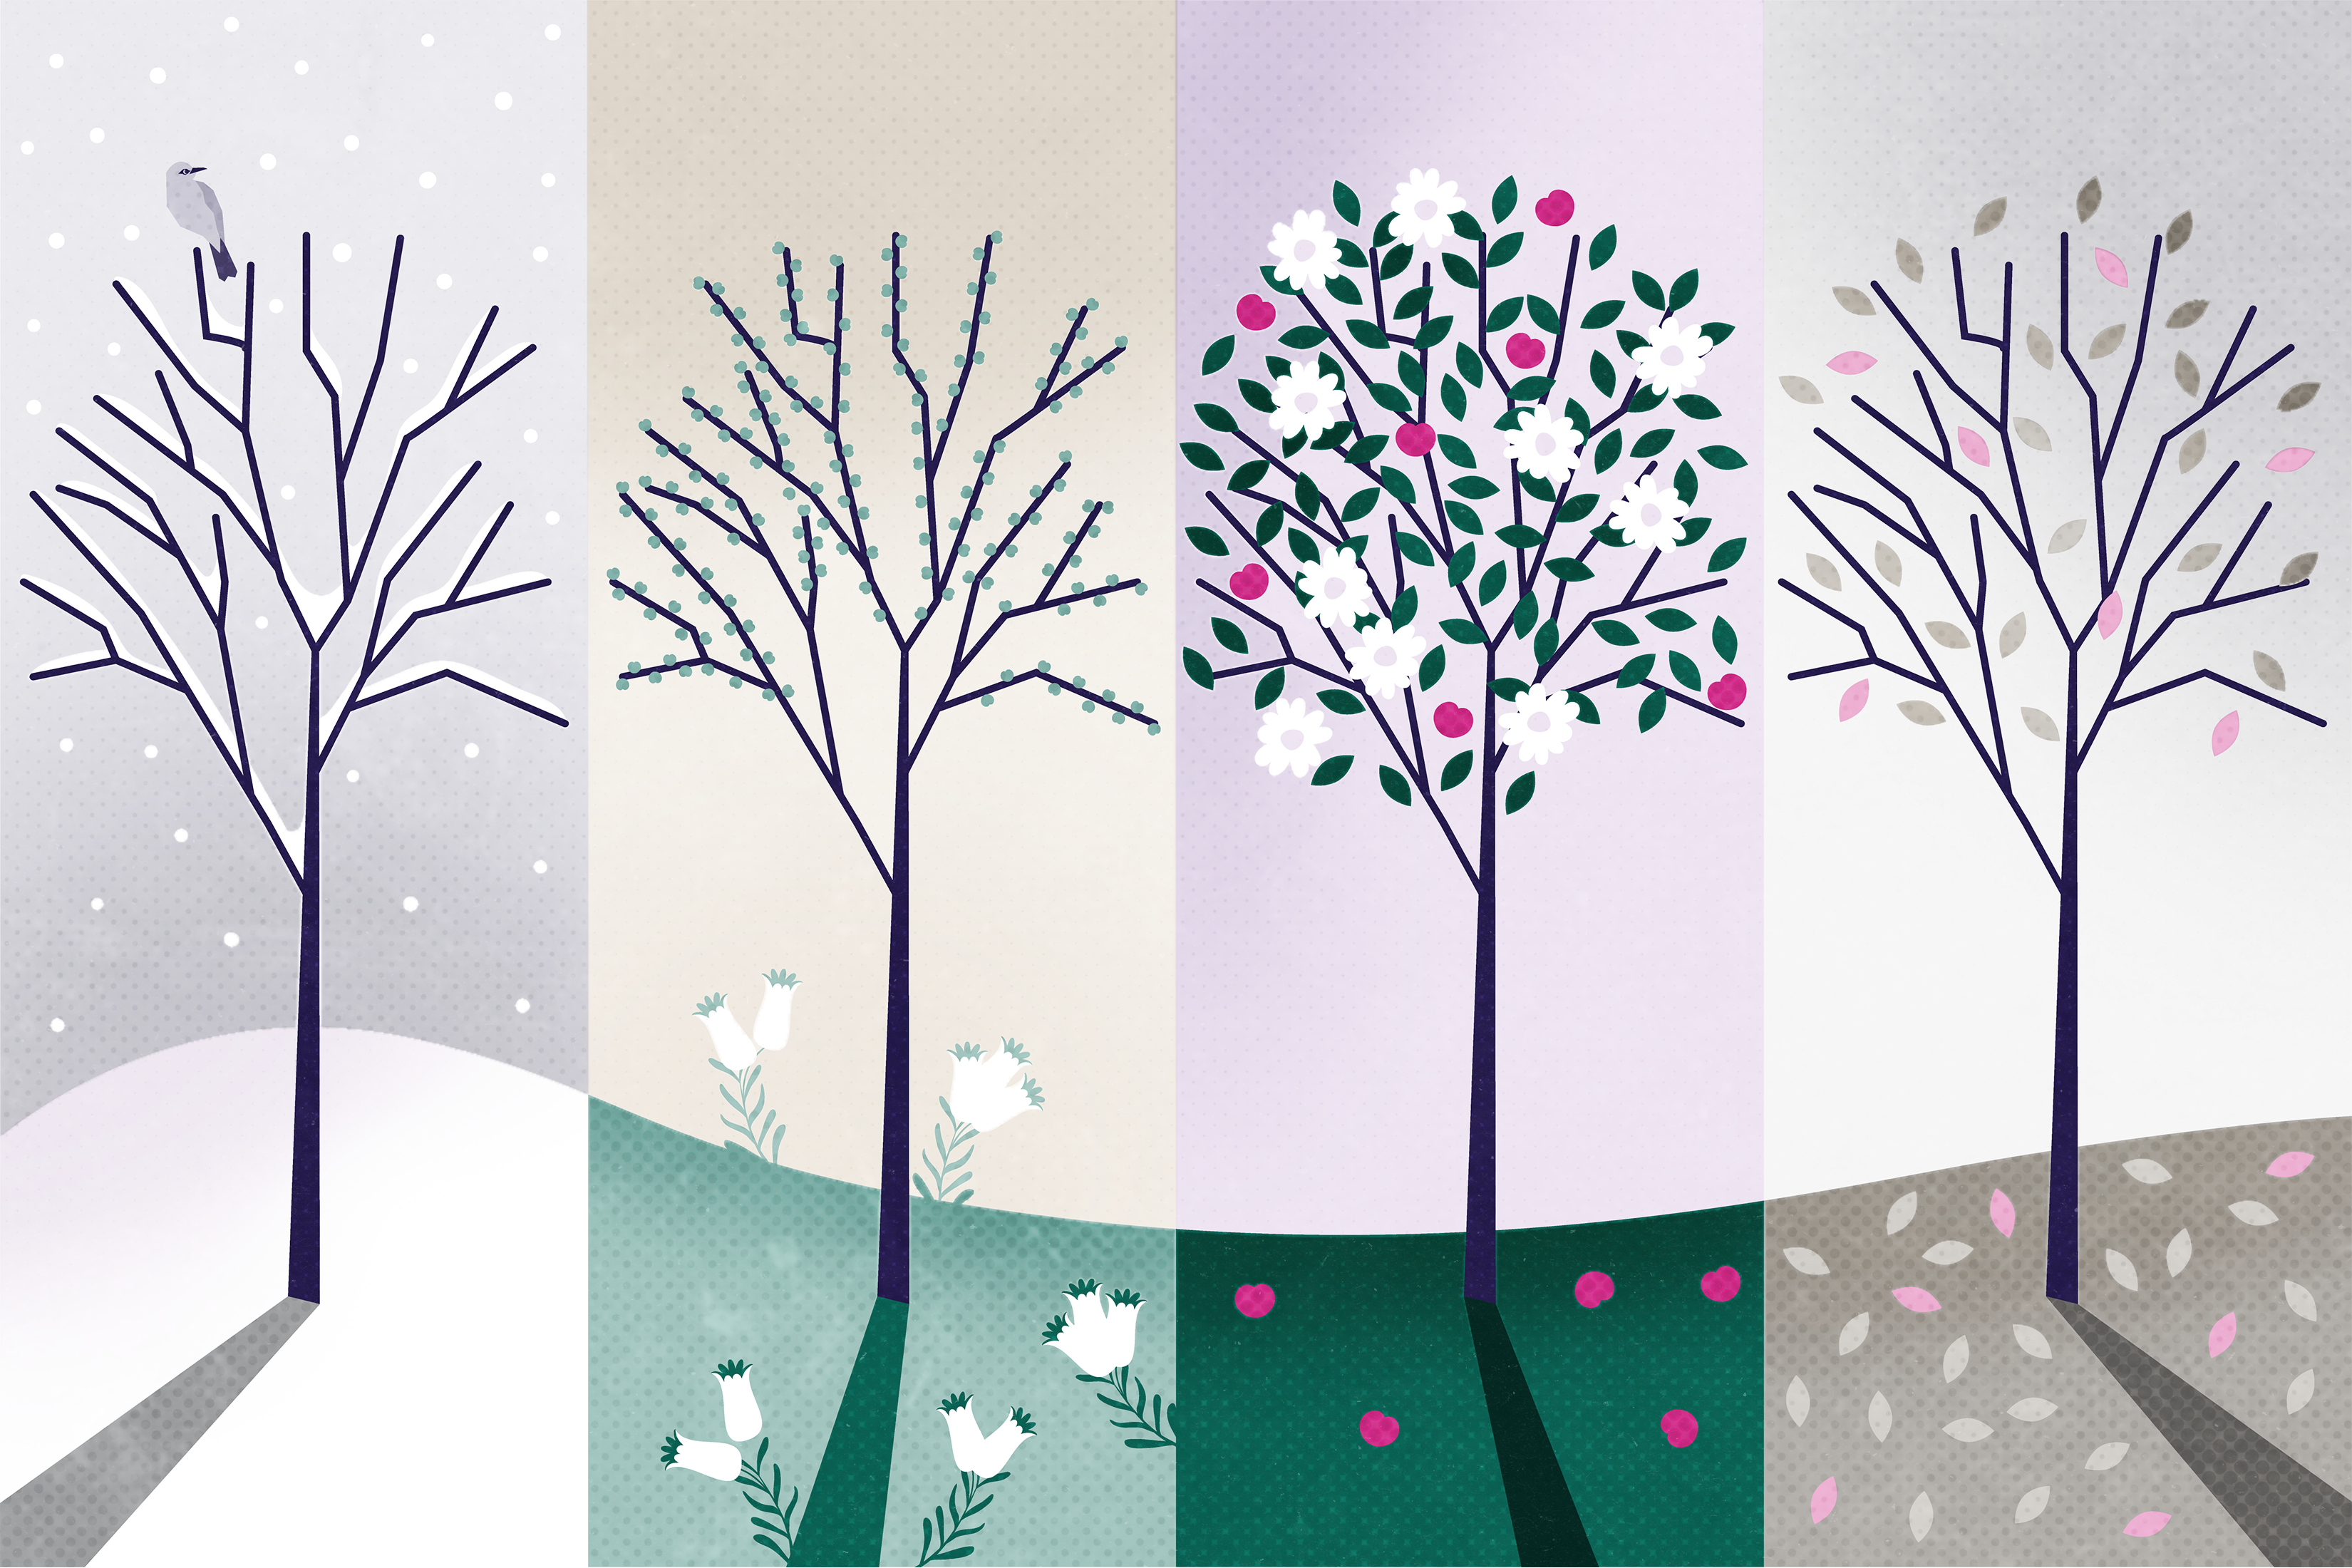 Image of tree across four changing seasons: winter, spring, summer, fall.